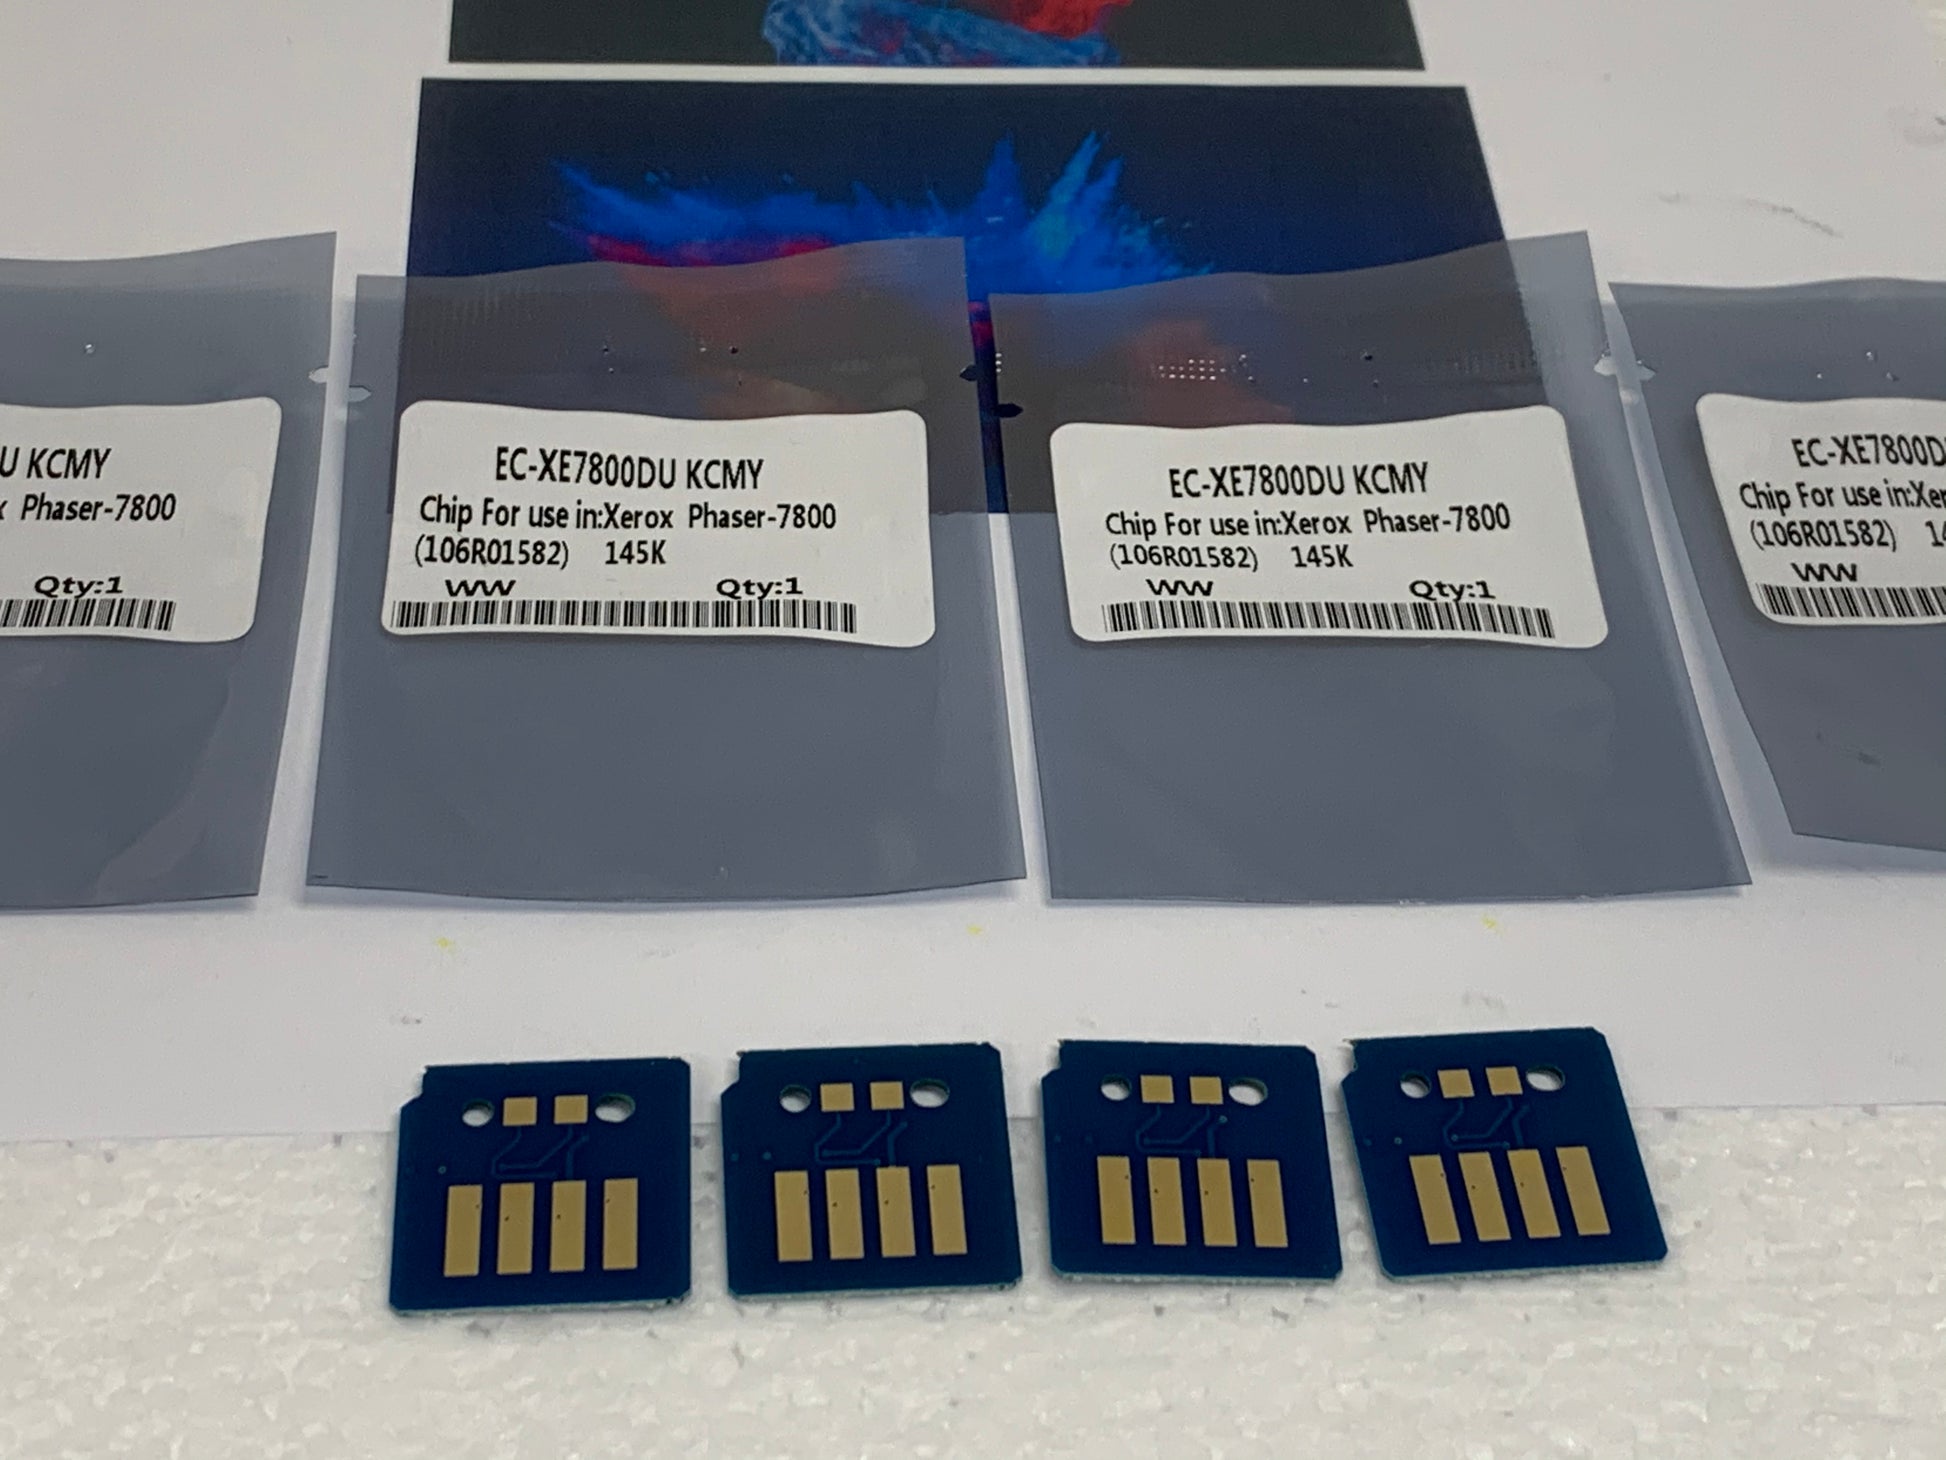 4 x Drum Reset Chips for Xerox Phaser 7800 7800DN 7800DX 7800GX 106R01582 - SOP-TECHNOLOGIES, INC.